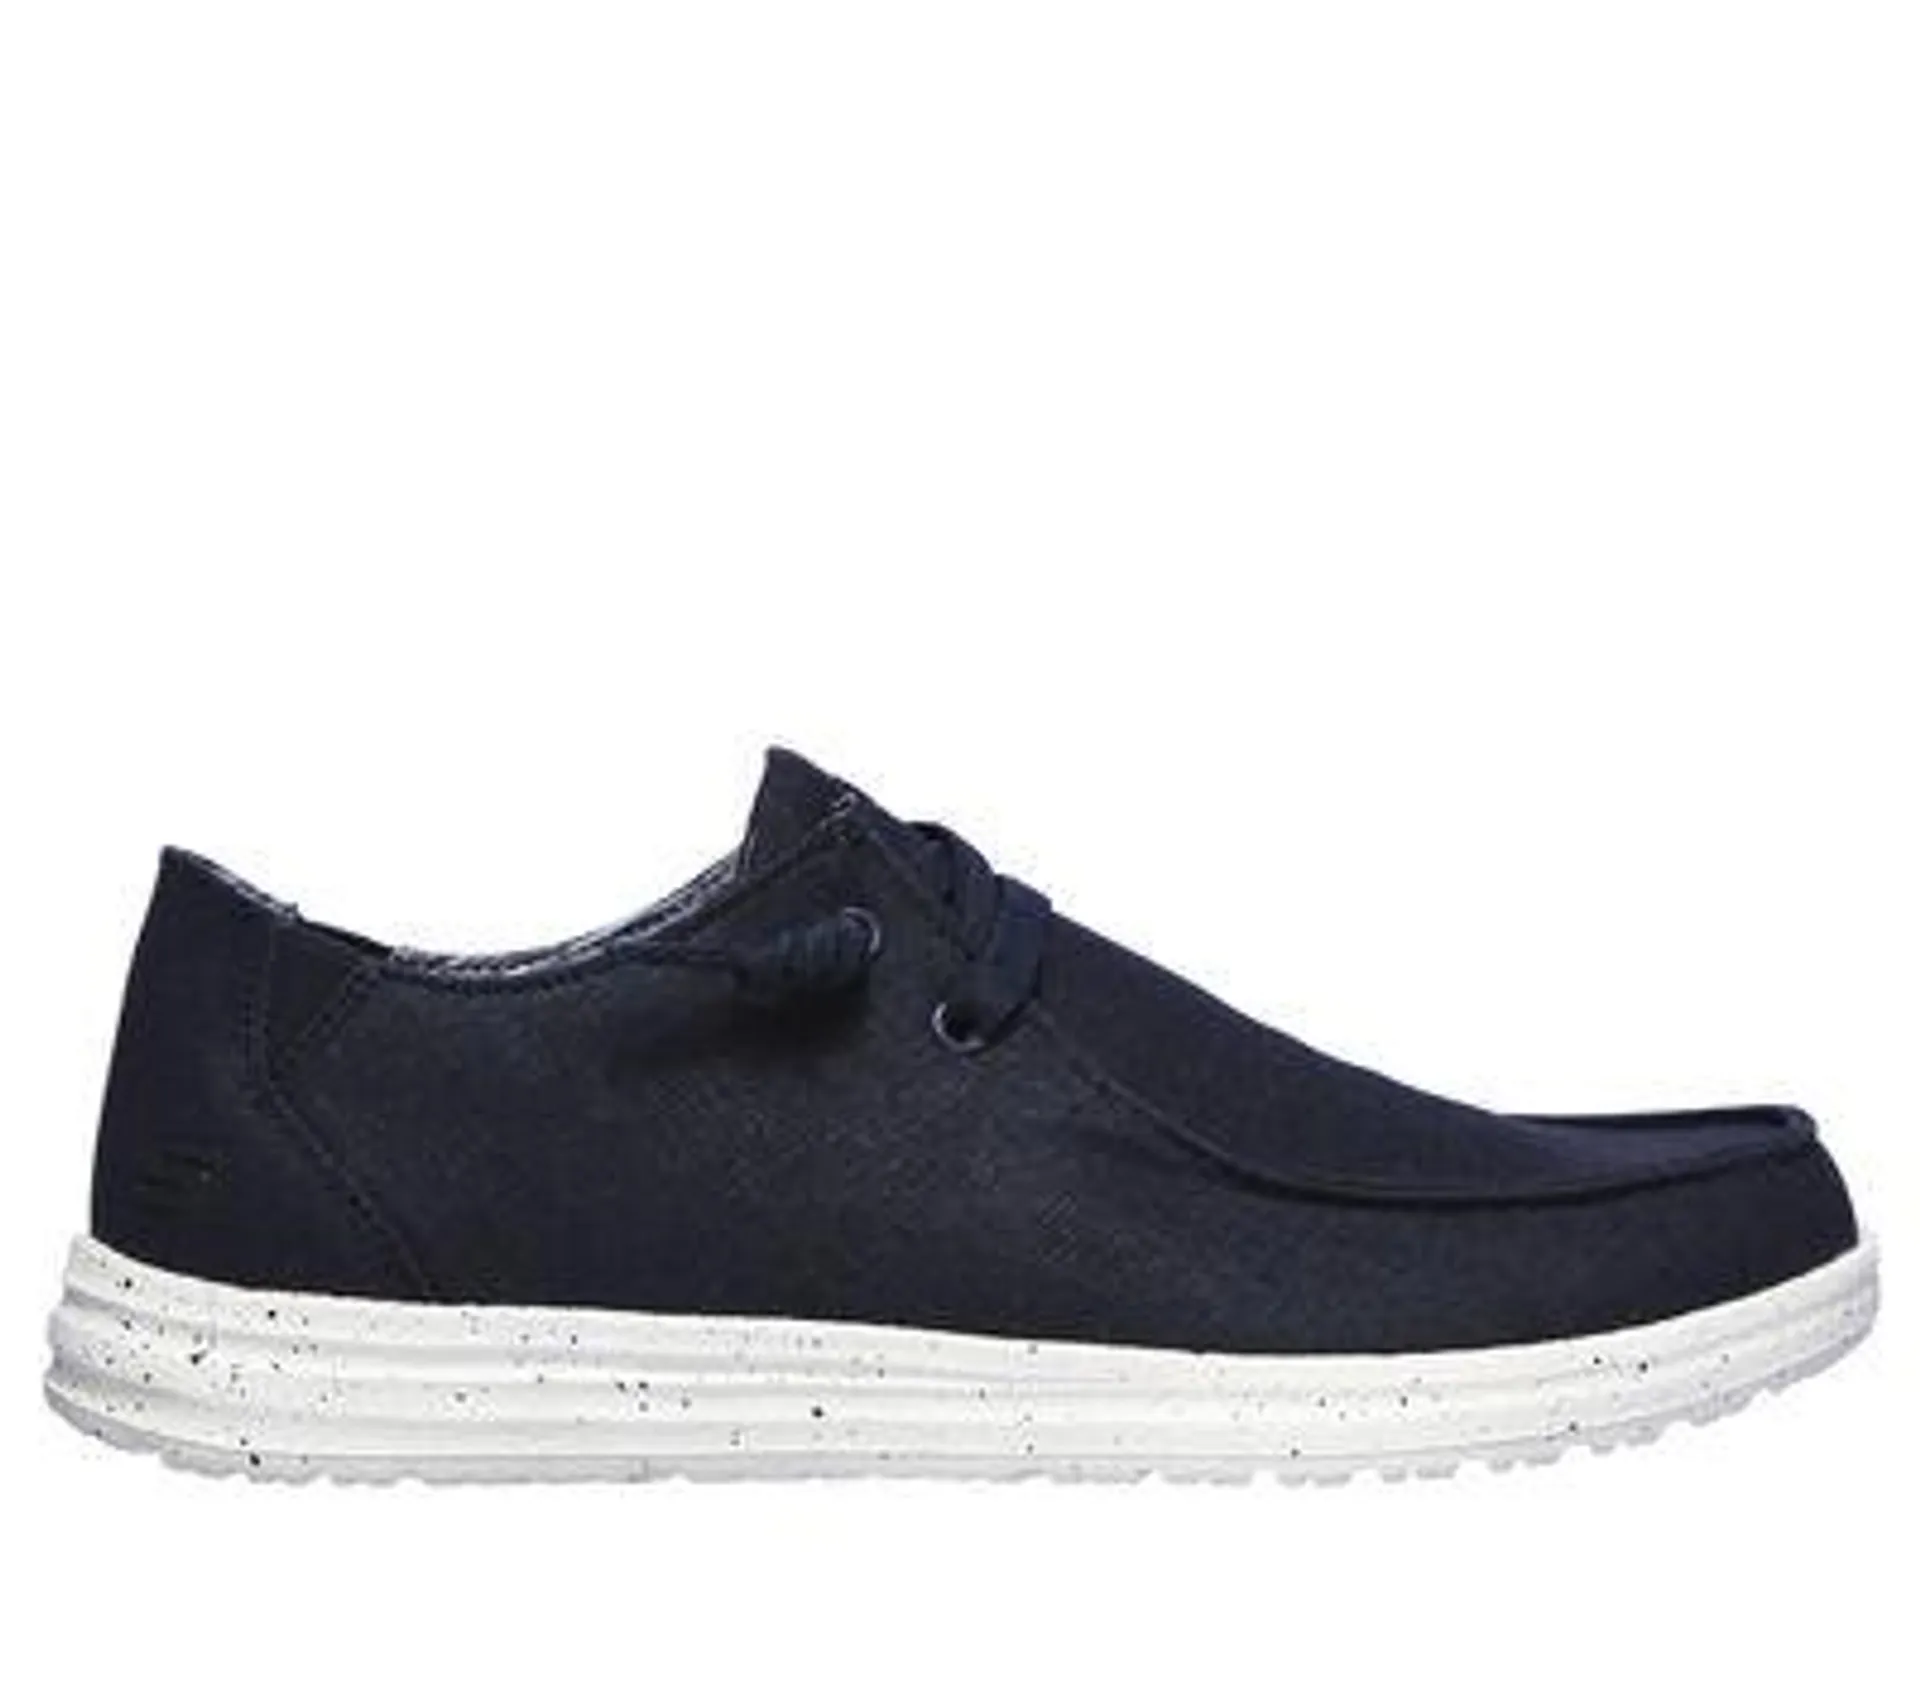 Skechers USA Men's Collection